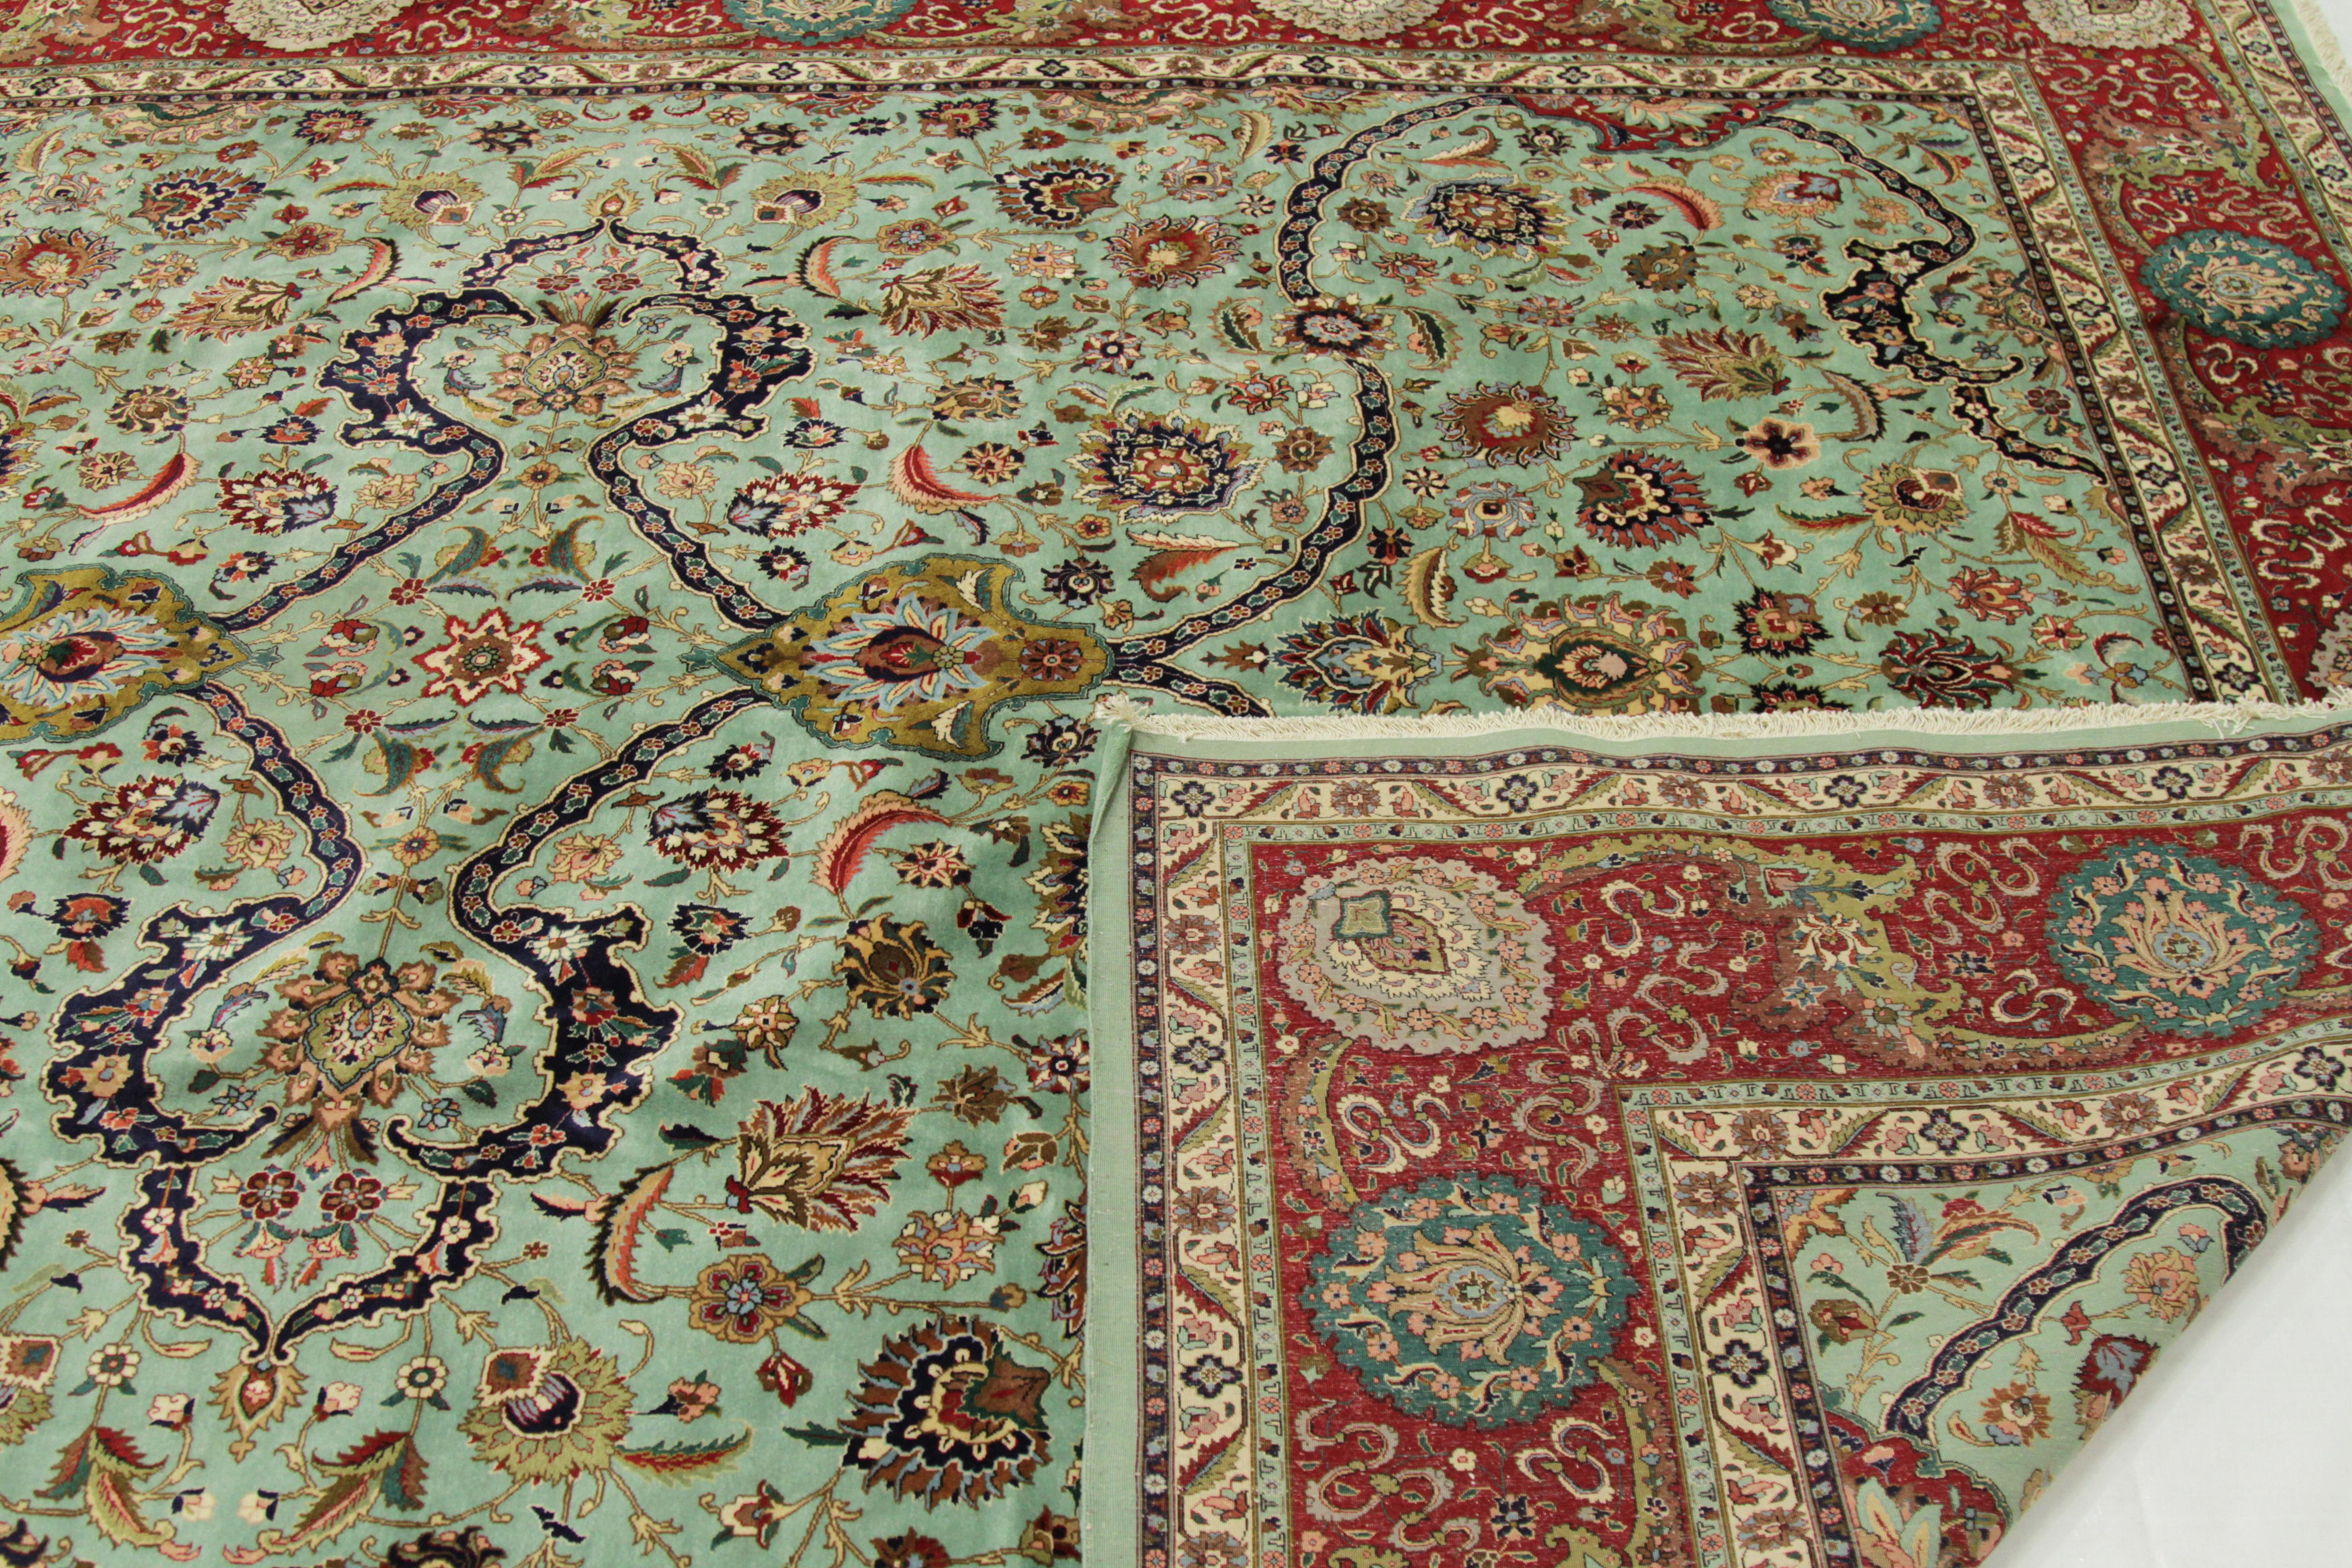 Wool 1970s Antique Tabriz Persian Rug with a Grand Blue and Red Floral Design For Sale